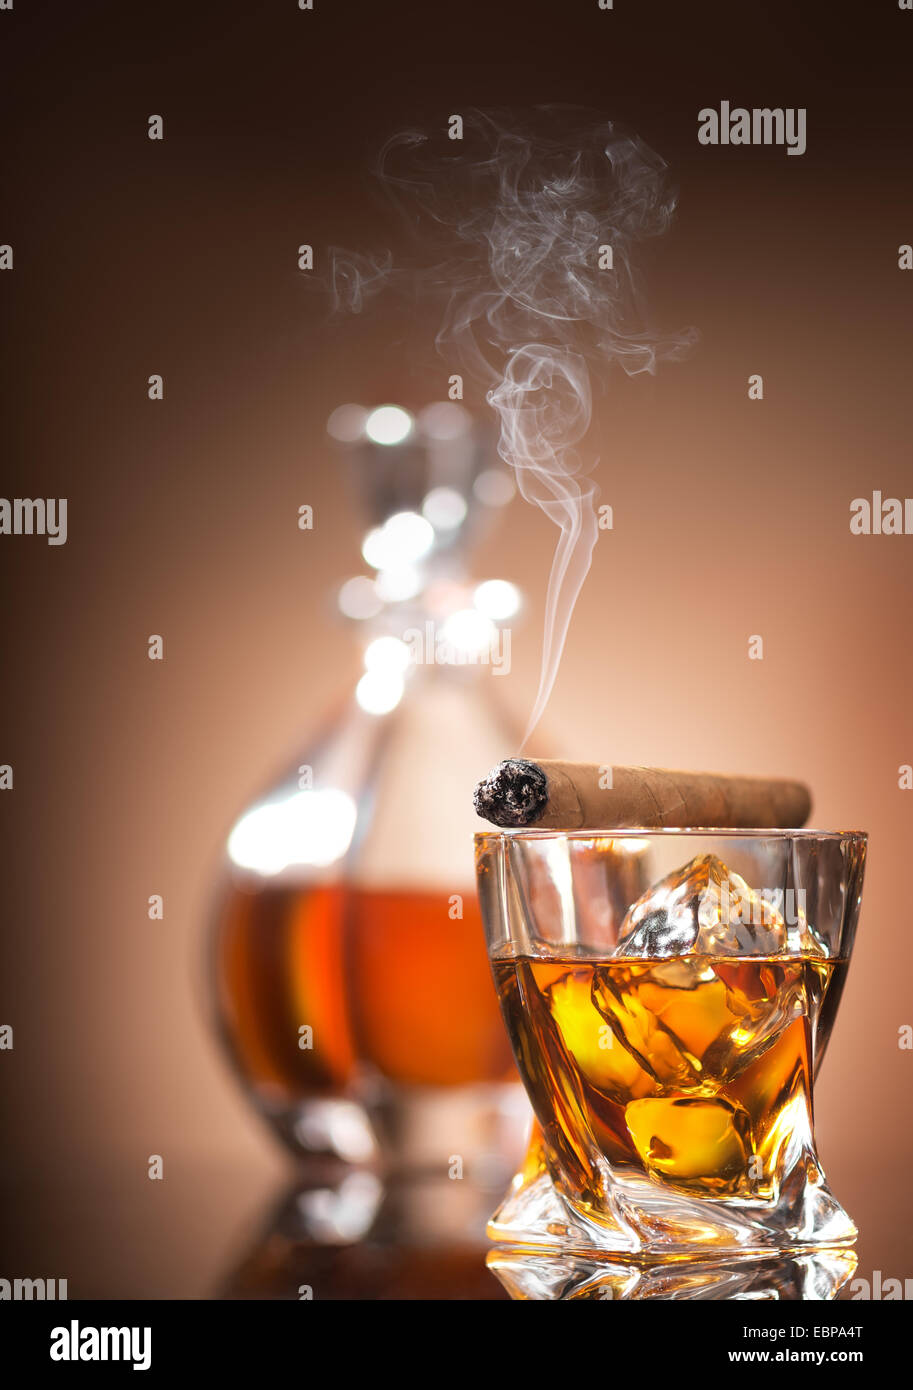 https://c8.alamy.com/comp/EBPA4T/cigar-on-glass-with-whiskey-on-brown-background-EBPA4T.jpg